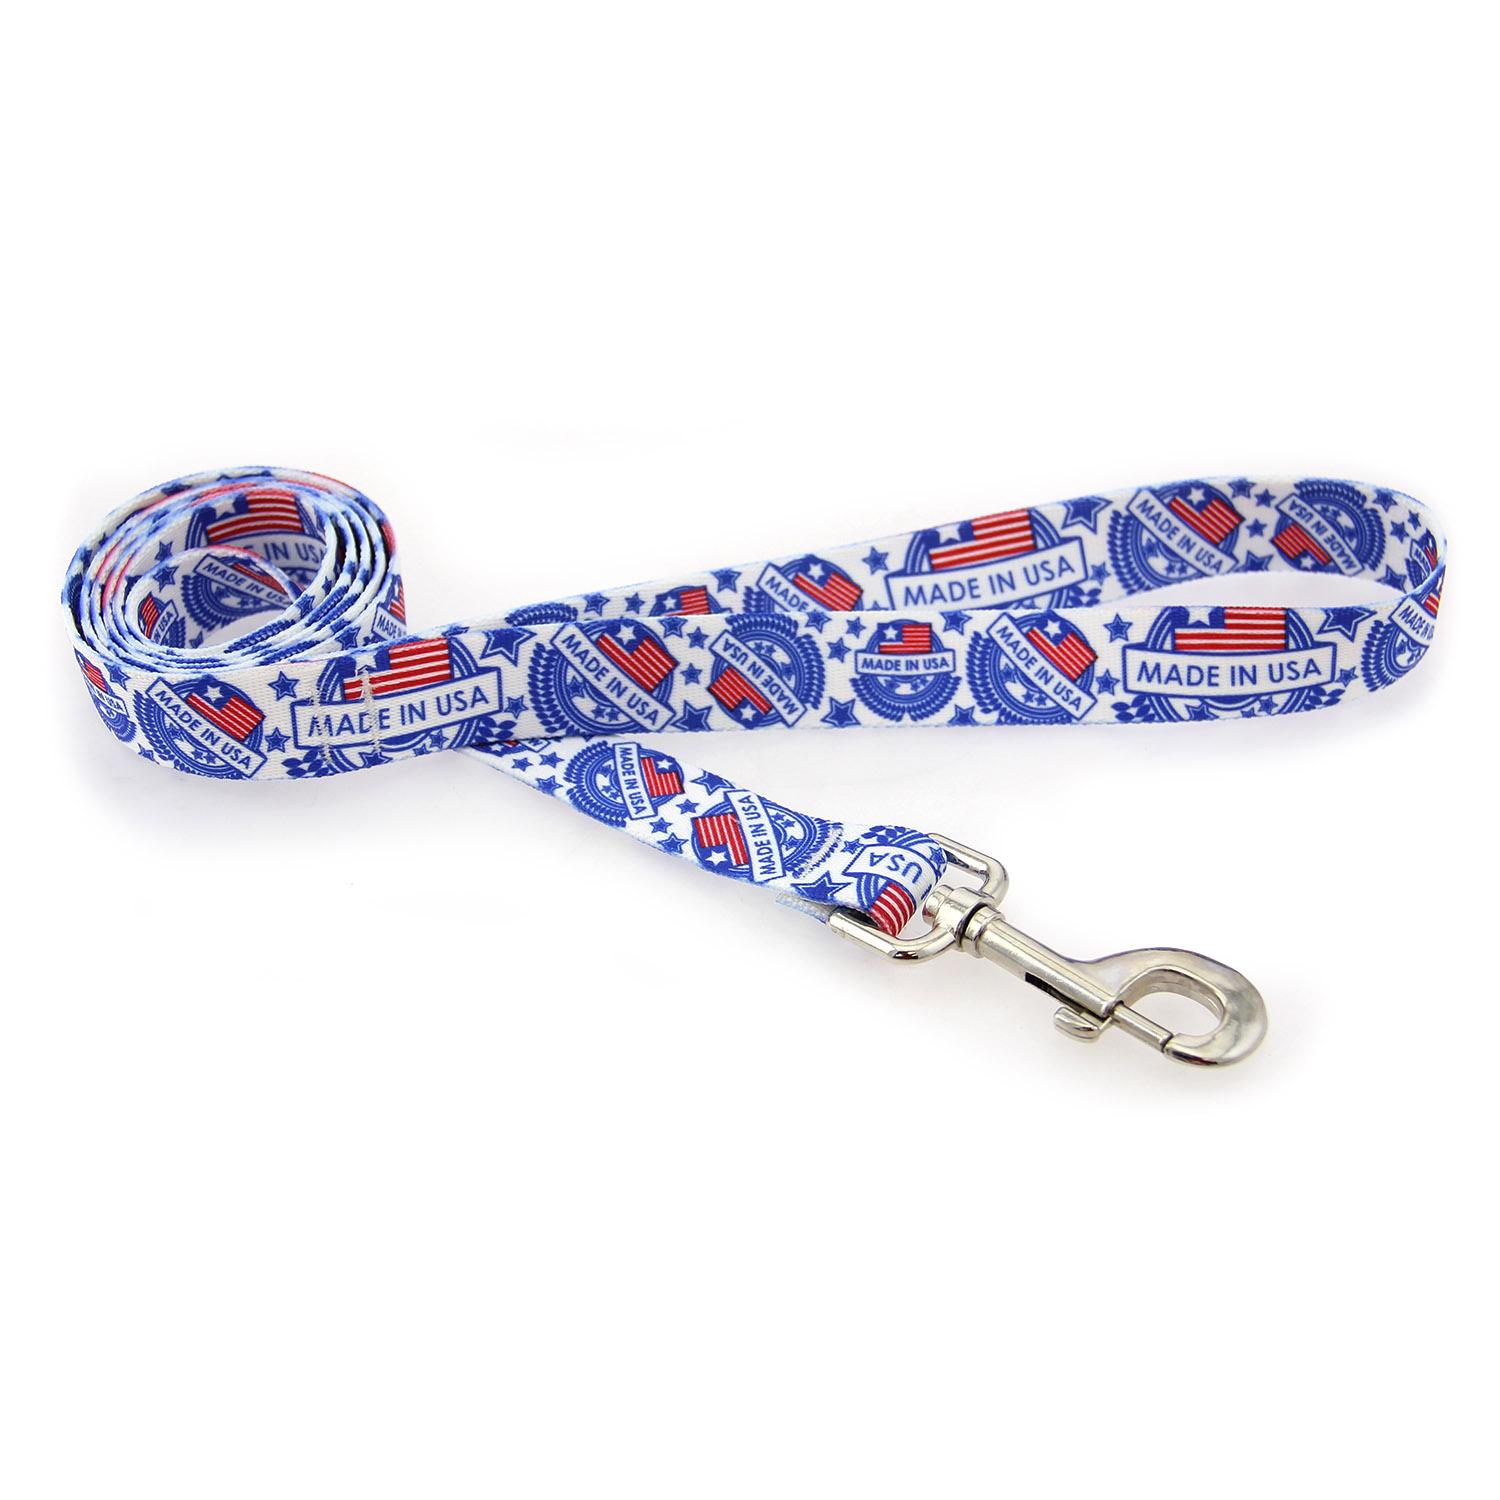 Made in USA Dog Leash by Yellow Dog - White